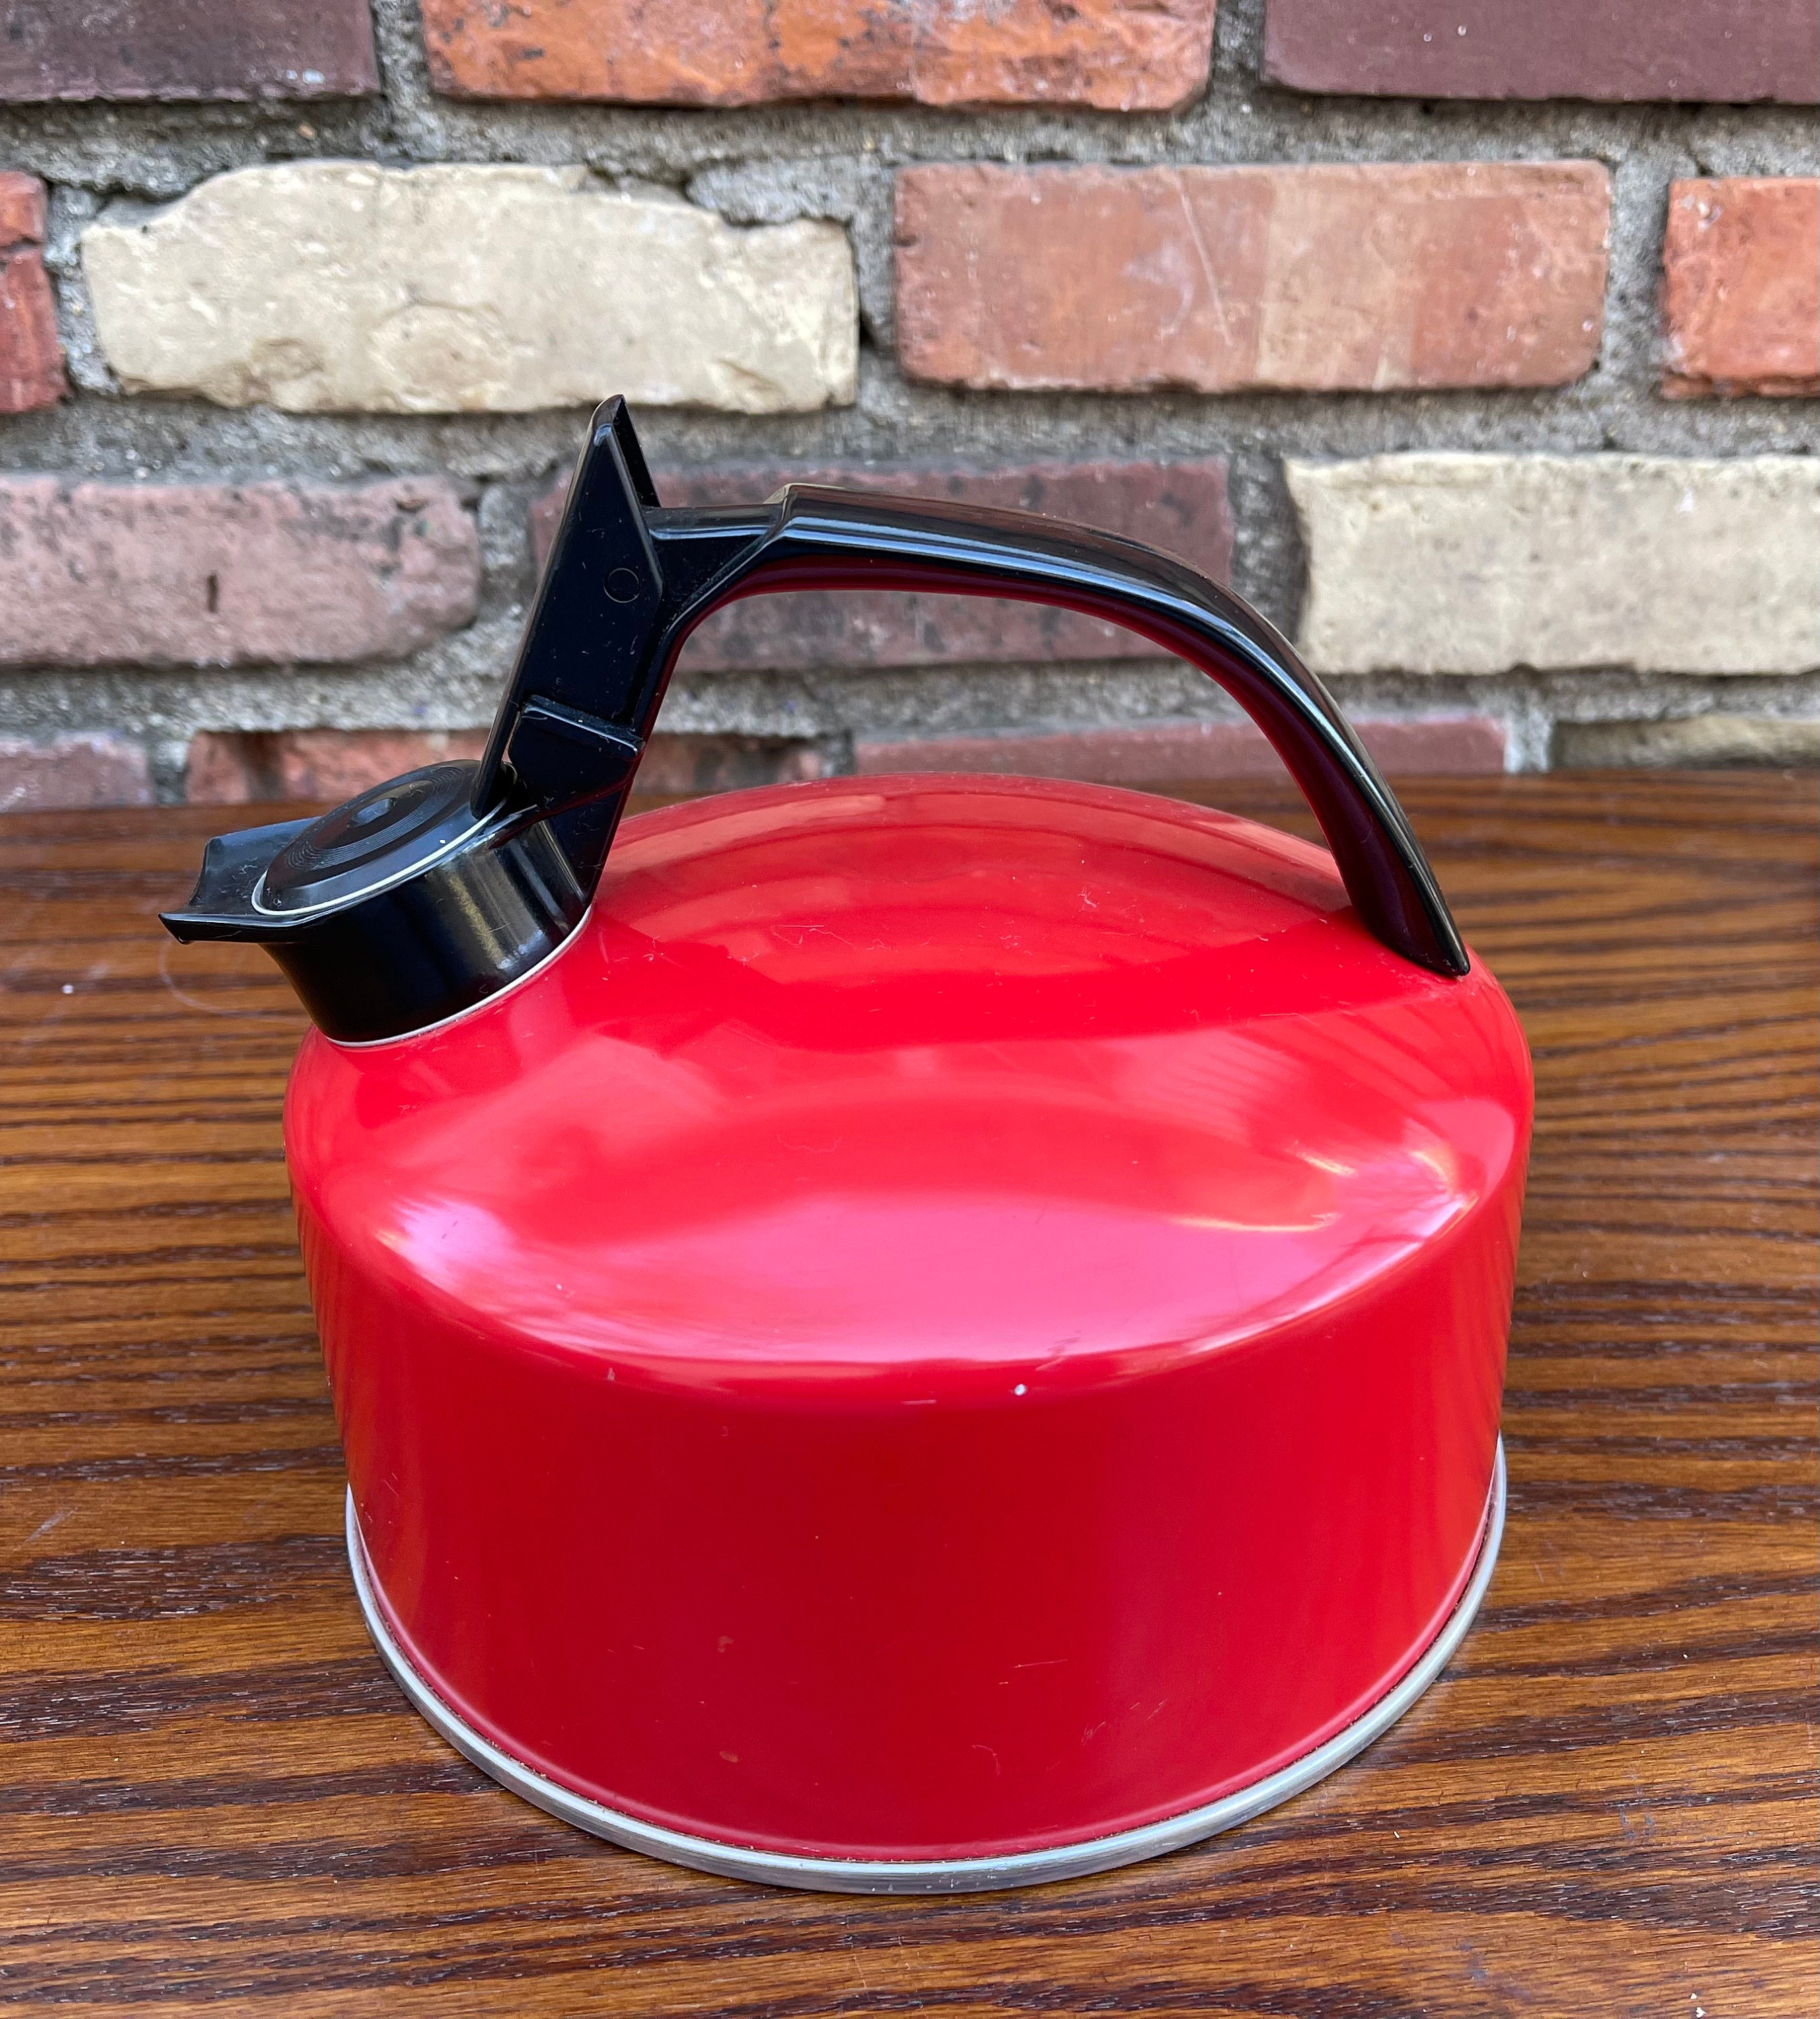 Copco 2.1 Qt Whistling Stainless Steel Tea Kettle Cherry Red Gloss